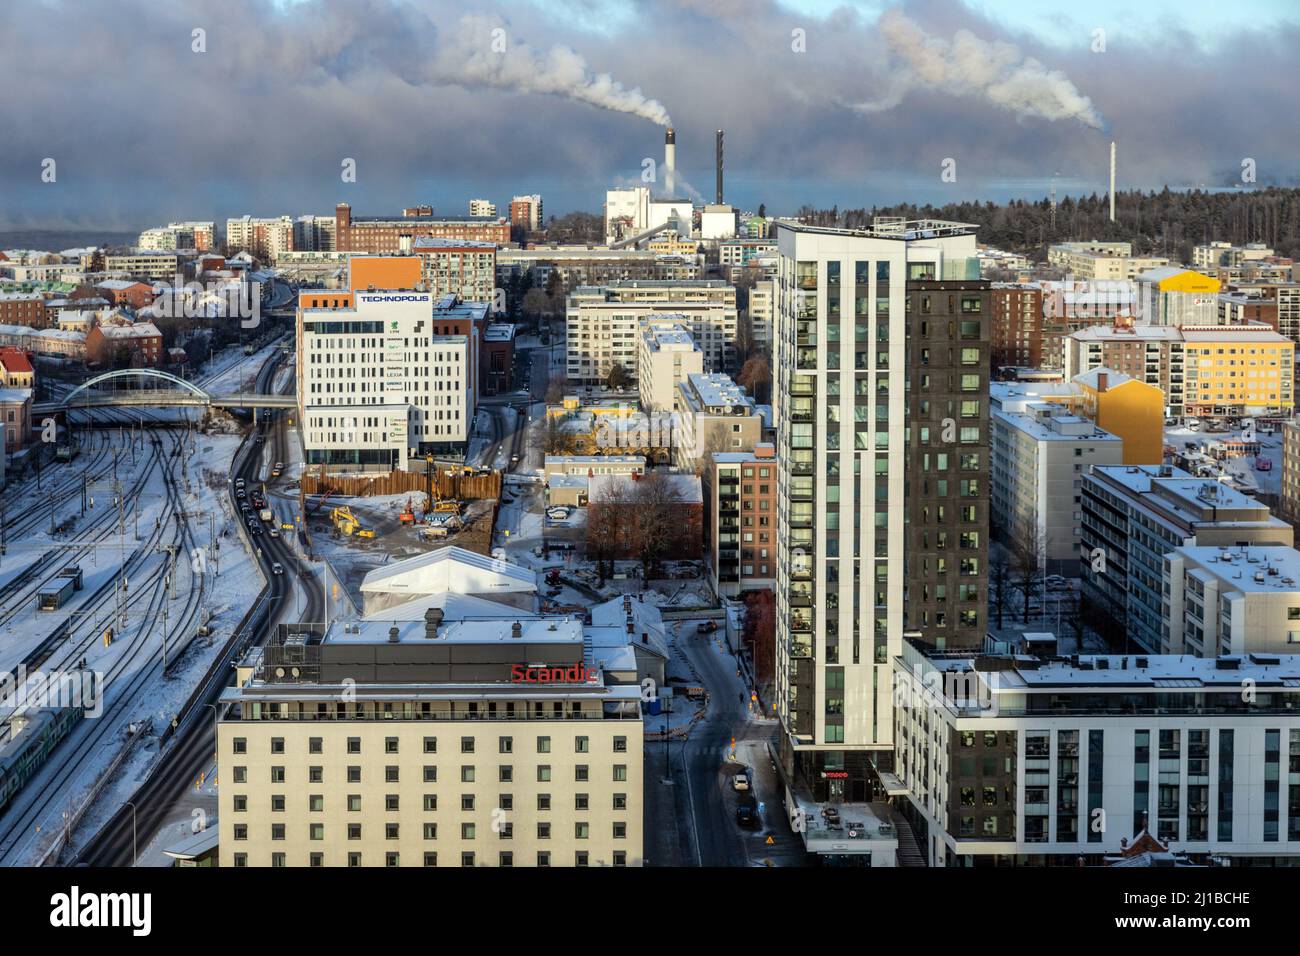 CITY CENTER, TRAIN STATION AND SMOKESTACKS OF THE METSA BOARD TAKO PAPERBOARD FACTORY SEEN FROM THE PANORAMIC MORO SKY BAR, INDUSTRIAL TOWN OF TAMPERE, FINLAND, EUROPE Stock Photo